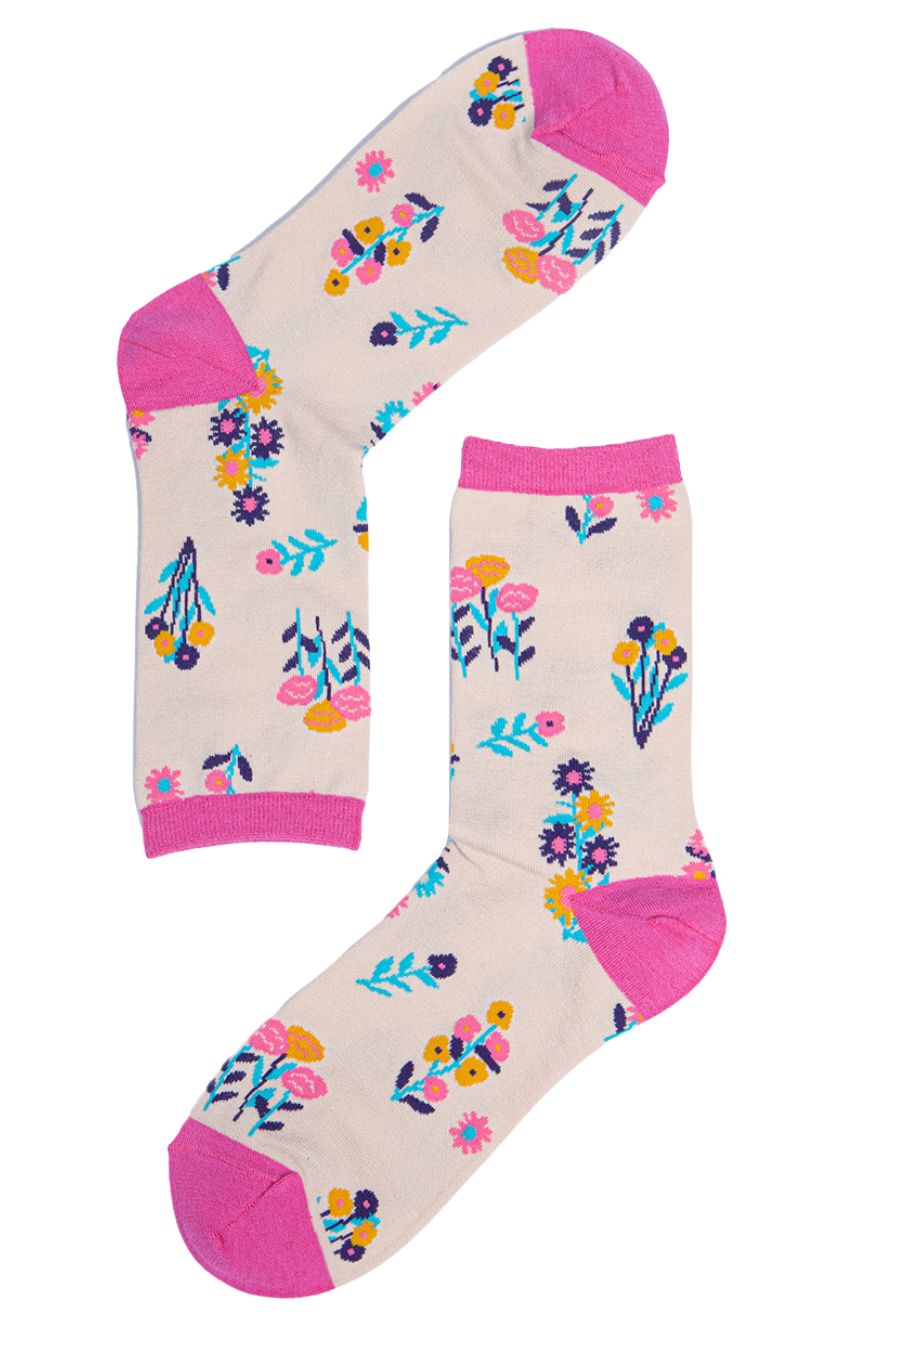 cream, pink ankle socks with colourful wildflowers